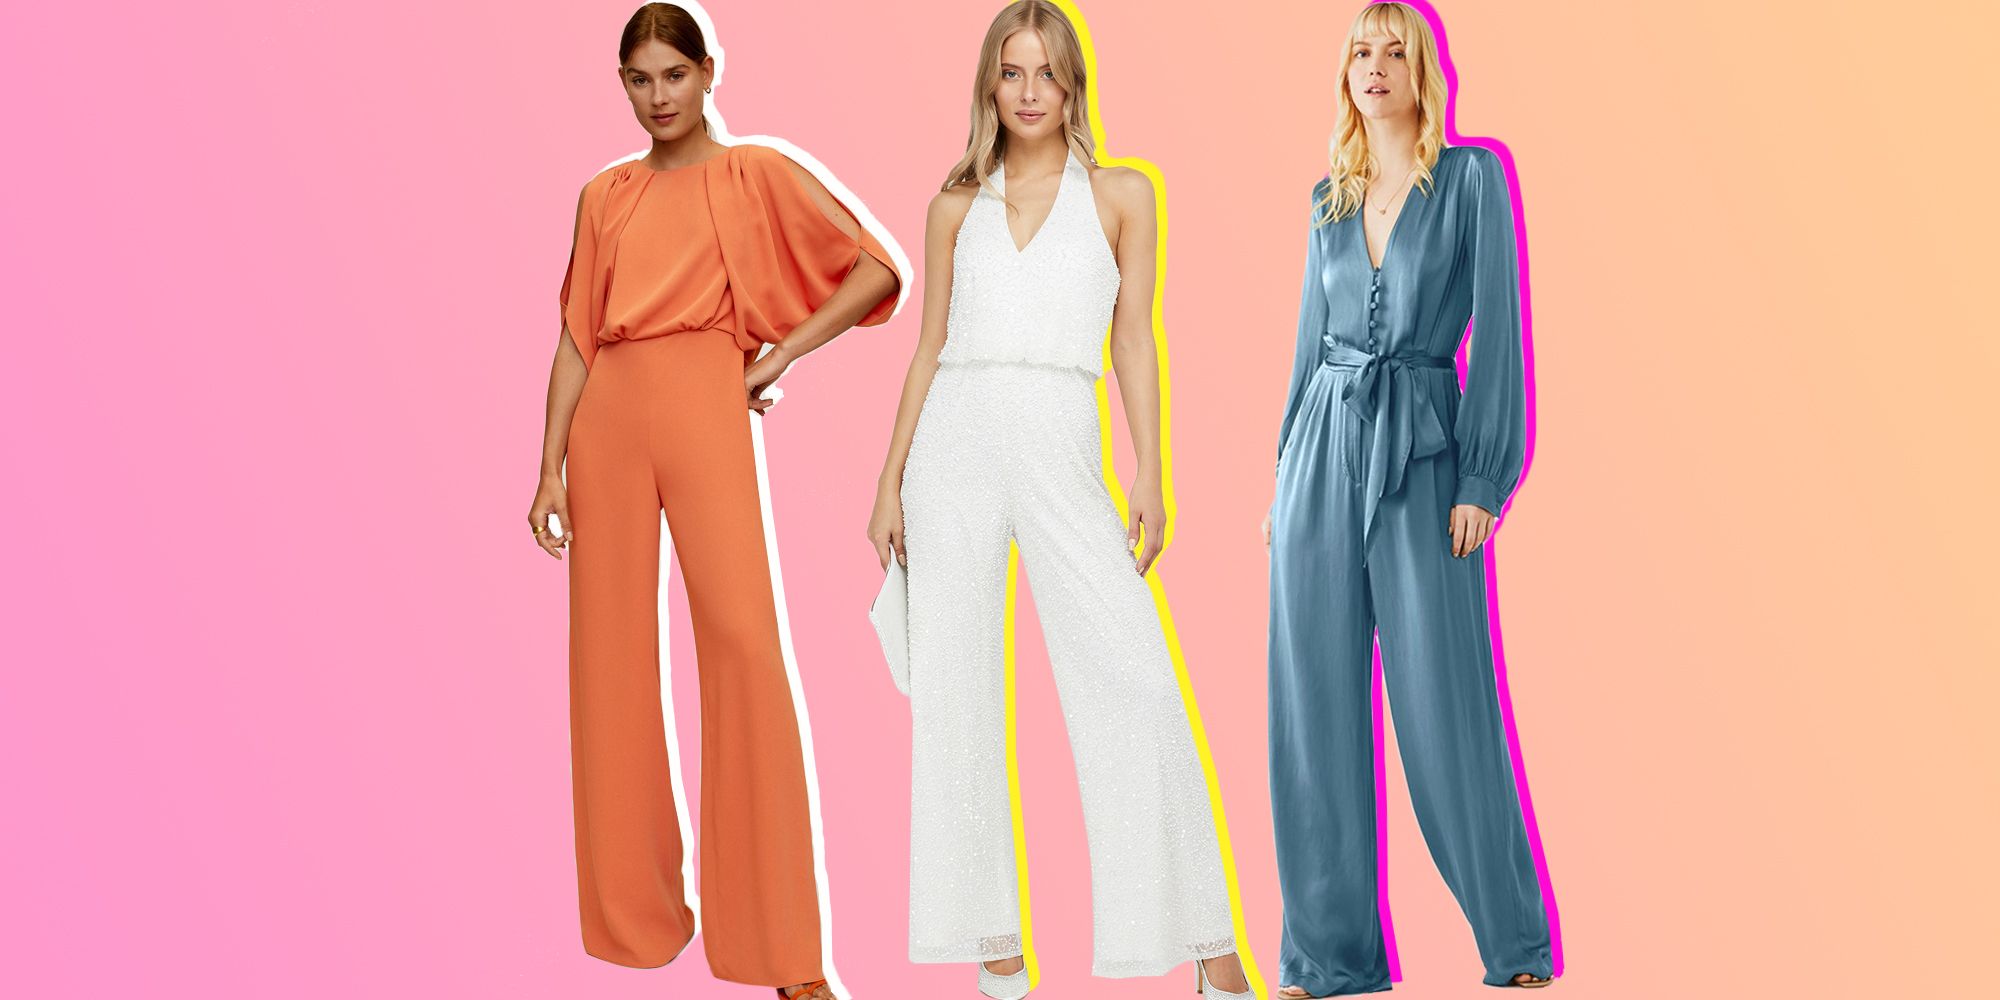 one piece jumpsuit for wedding